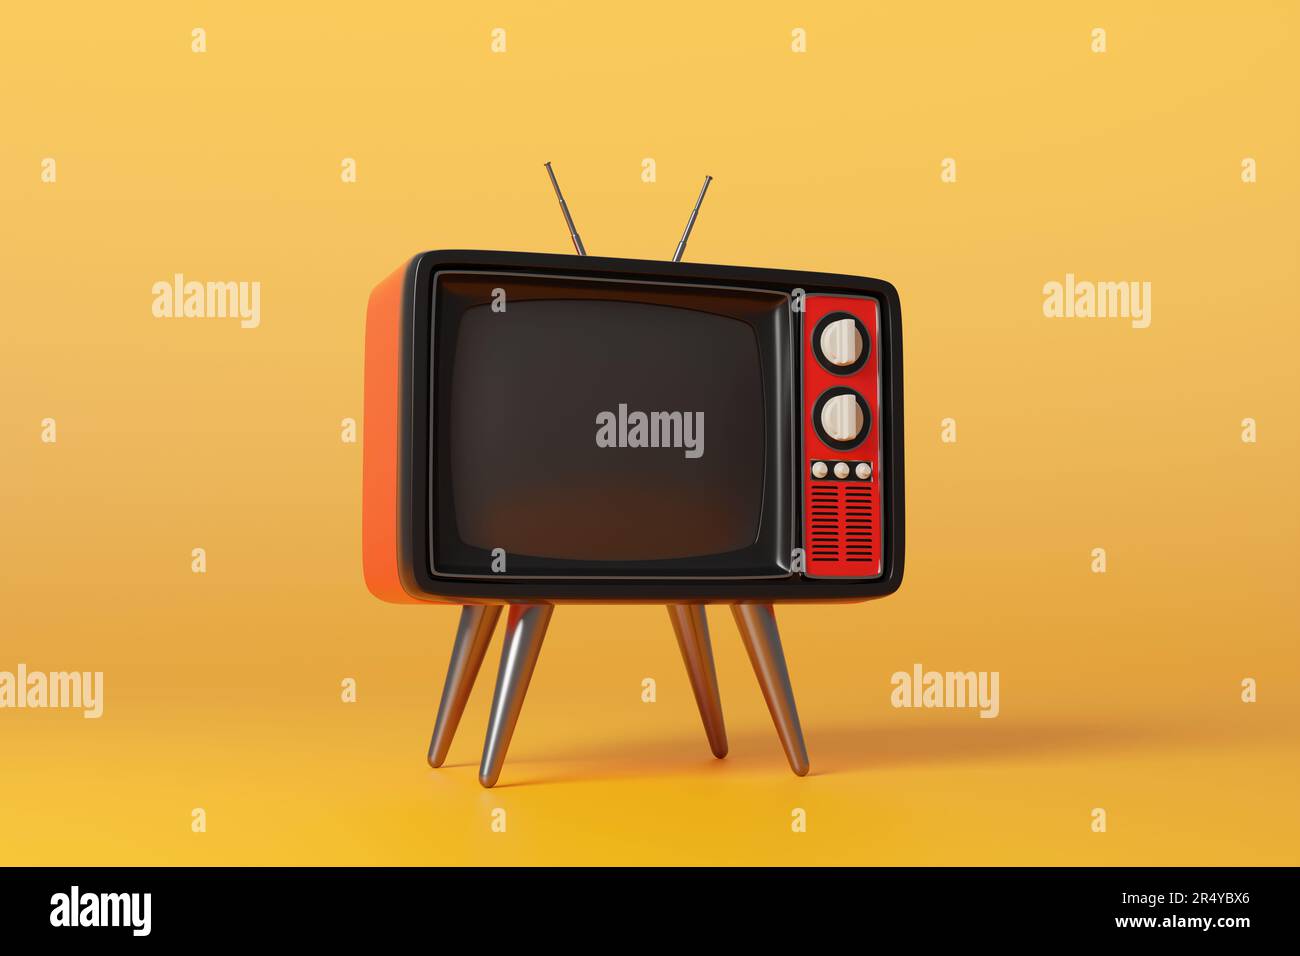 Red retro style television on bright orange background. Illustration of the concept of live broadcasting and telecommunication Stock Photo